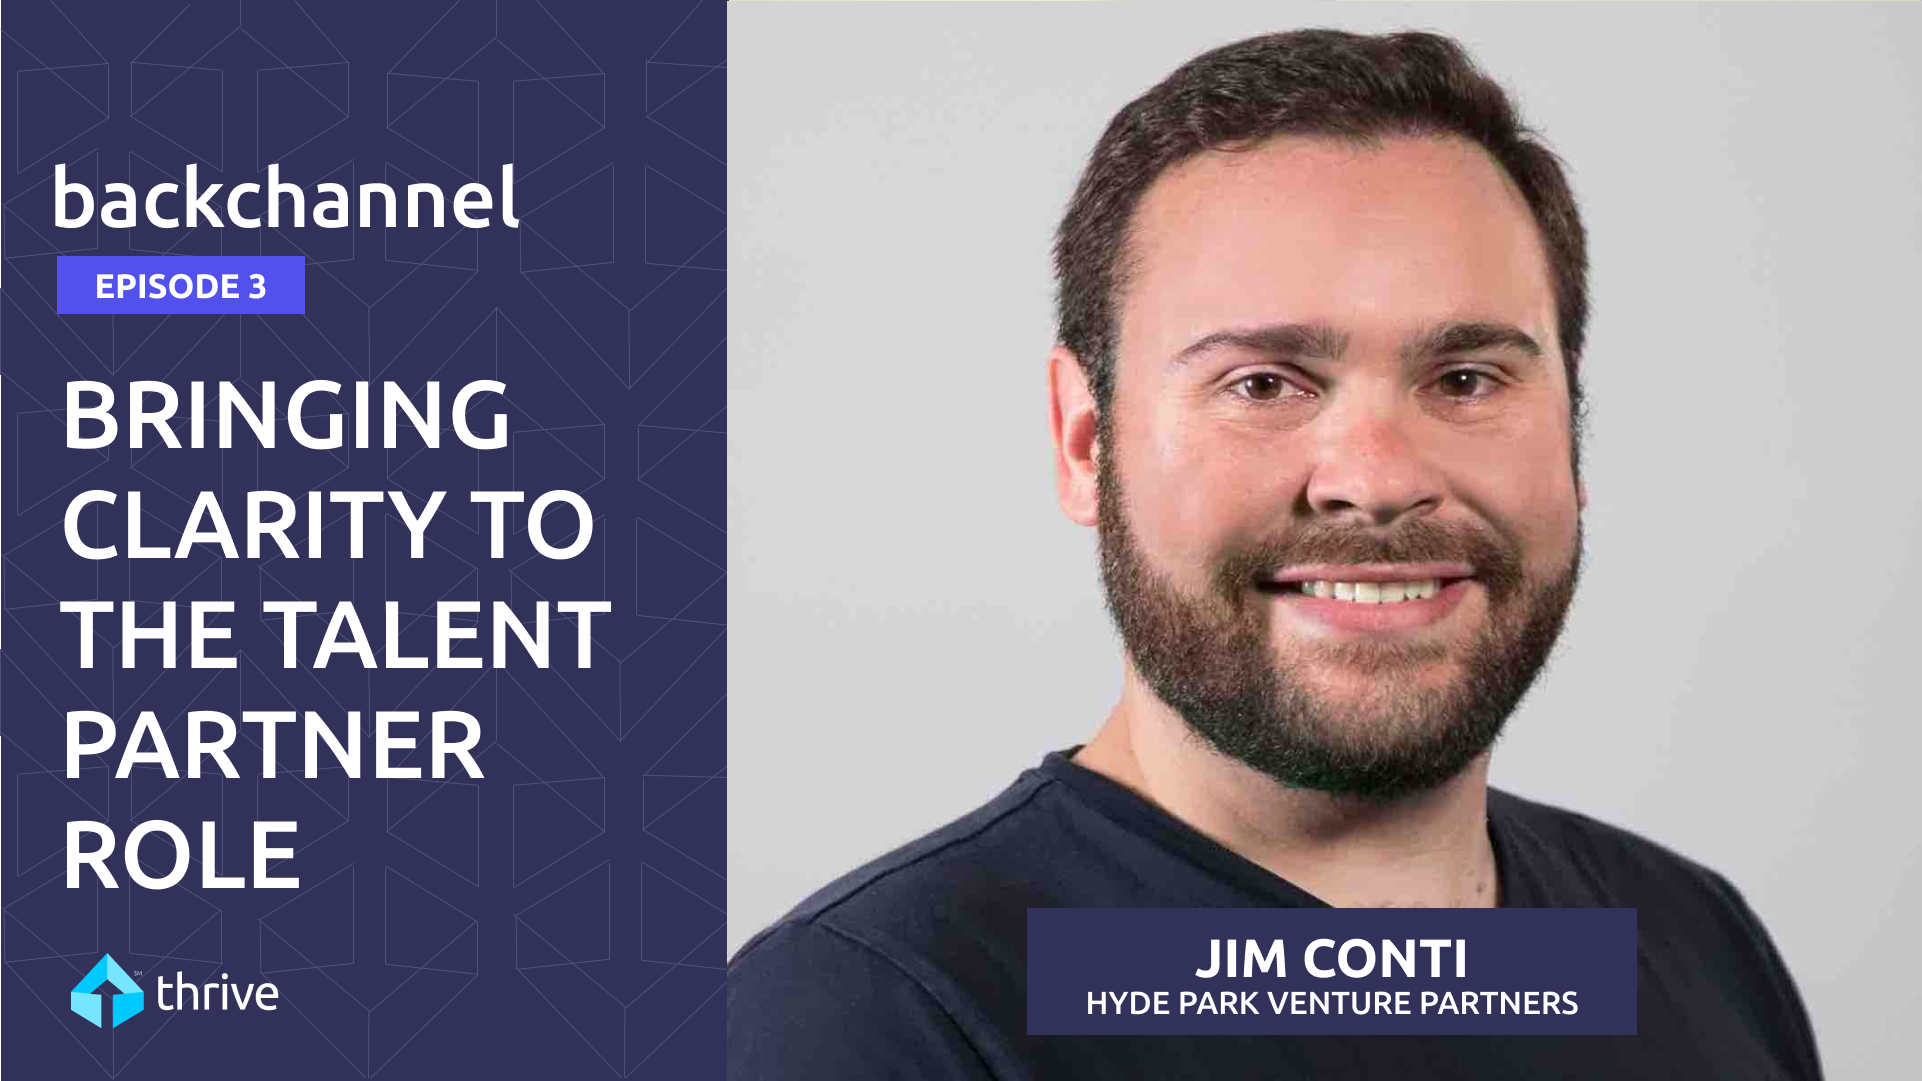 backchannel Episode 3, Bringing Clarity to the Talent Partner Role with Jim Conti, Hyde Park Venture Partners